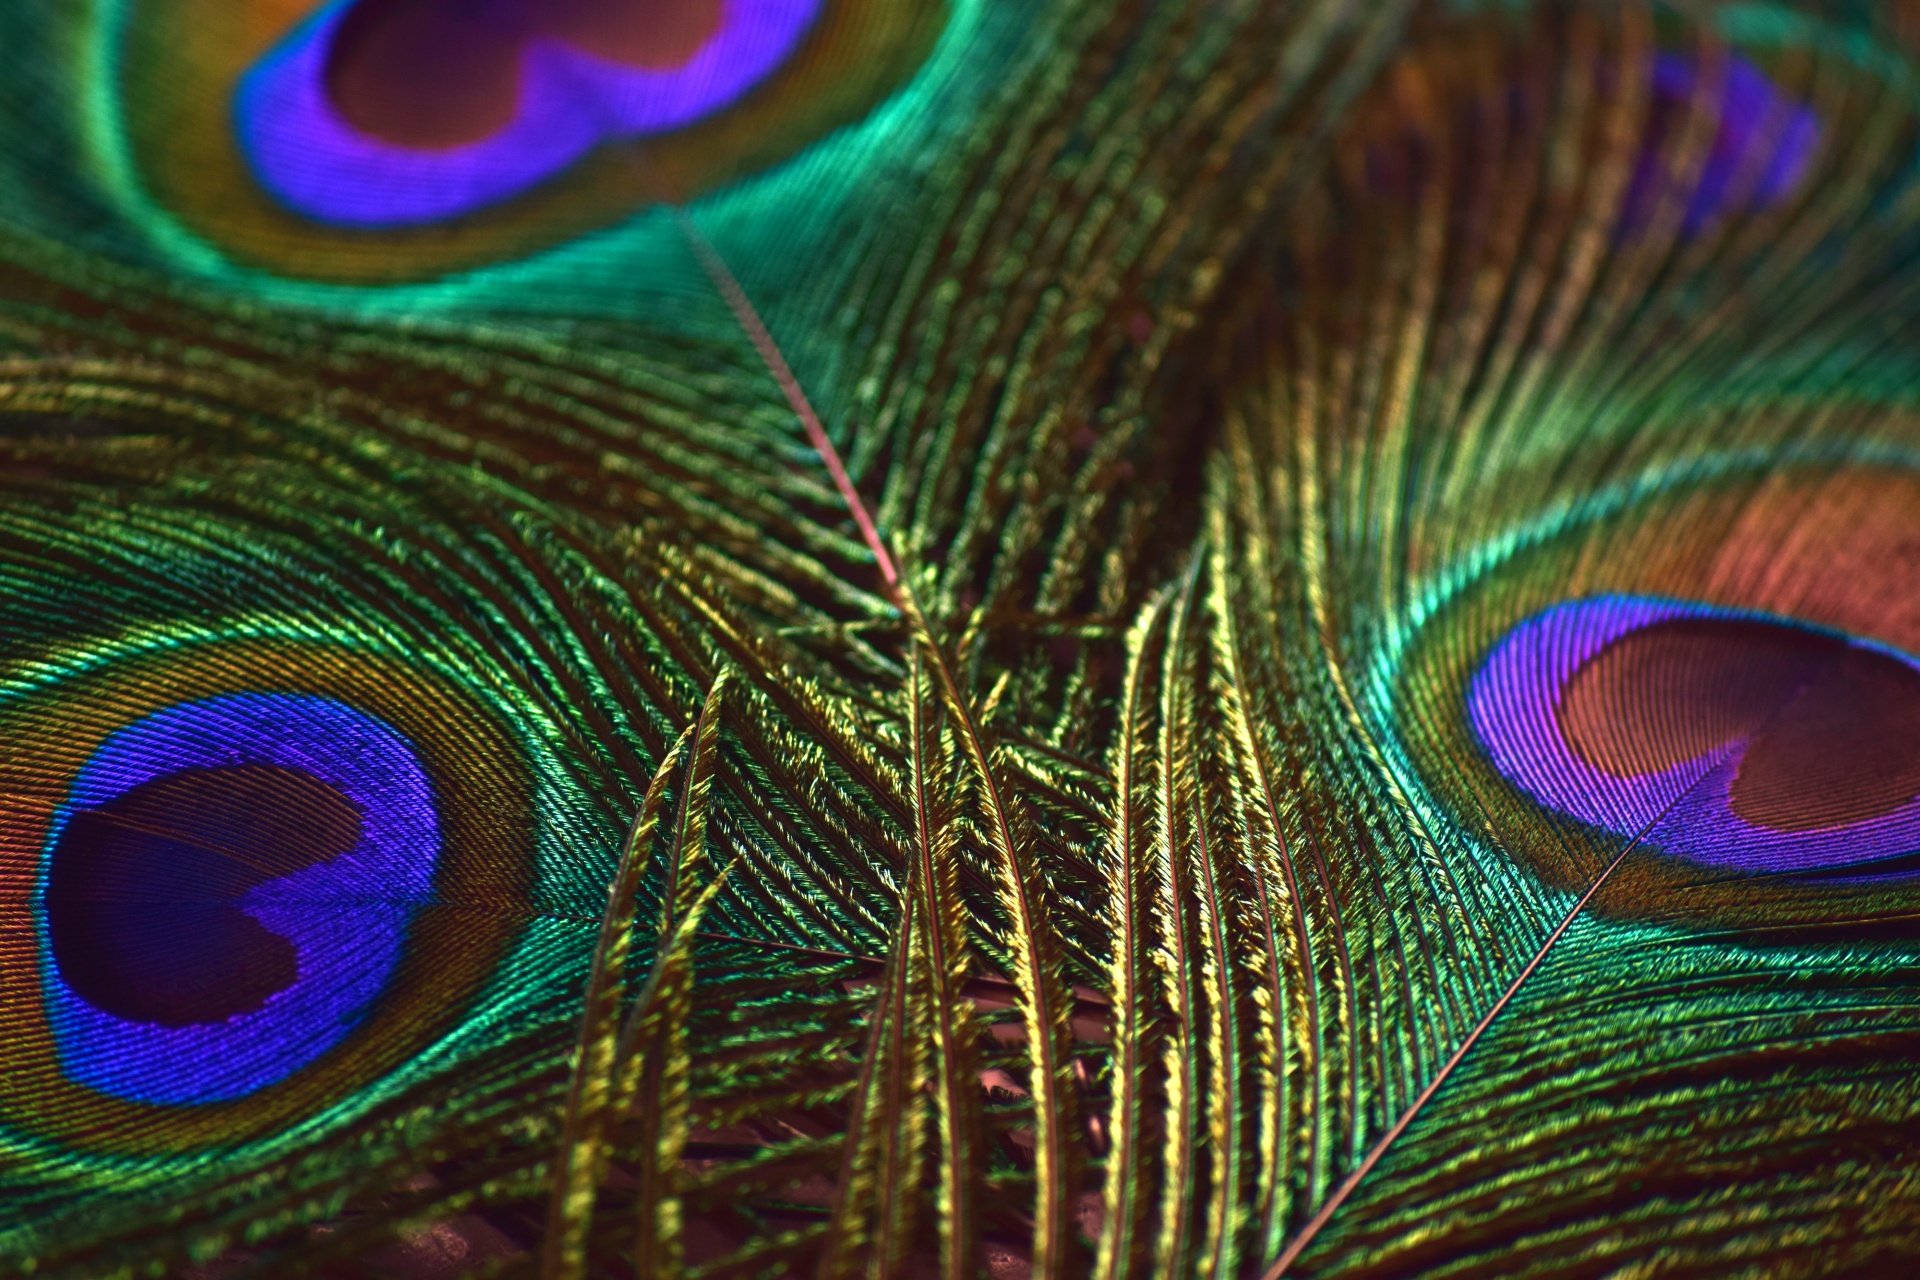 Images Of Peacock Feather - Peacock Feathers 8 Free Stock Photo ...